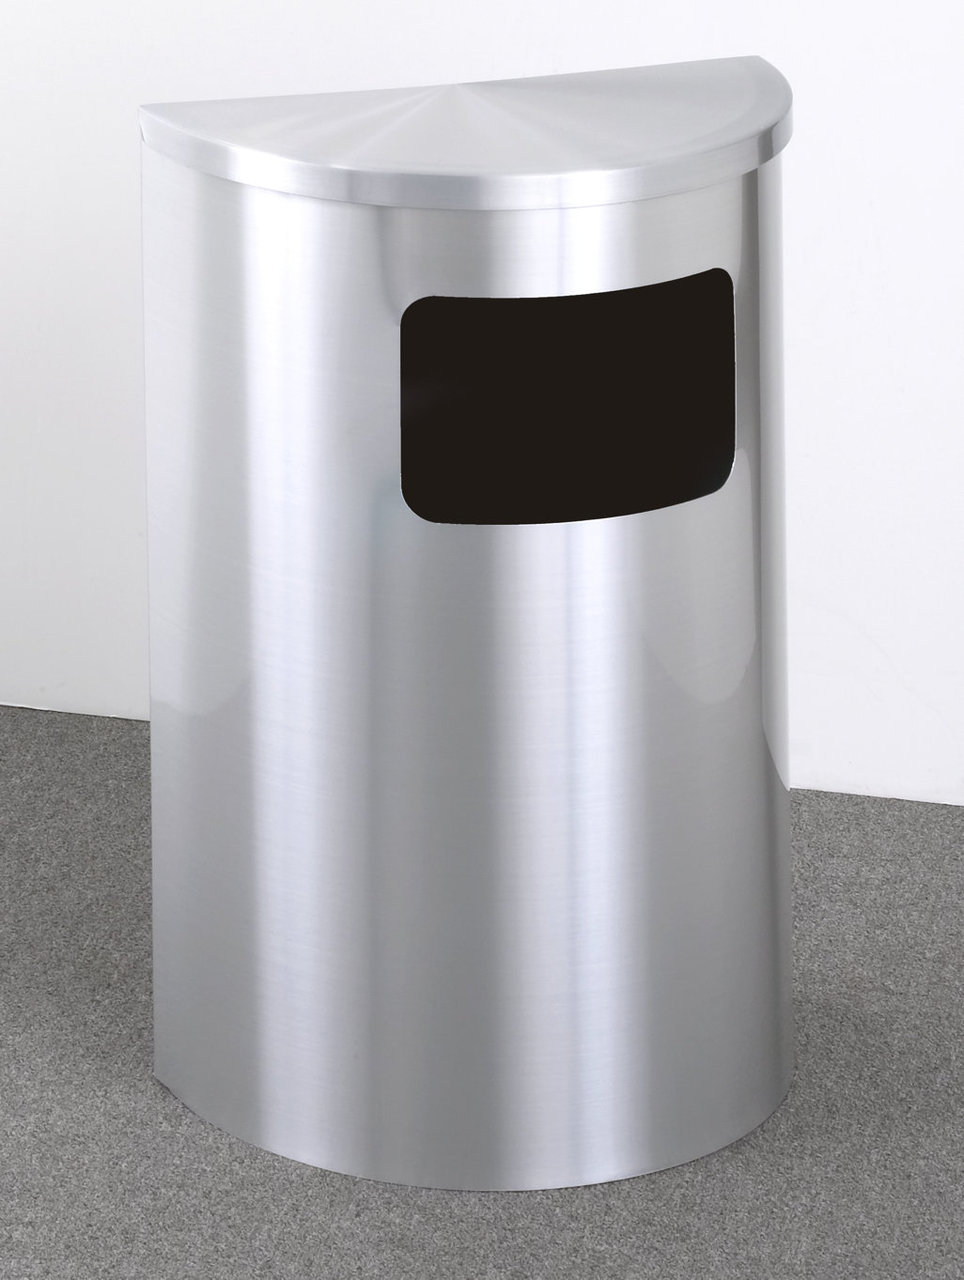 How to Buy the Right Indoor Trash Can - Trash Cans Unlimited